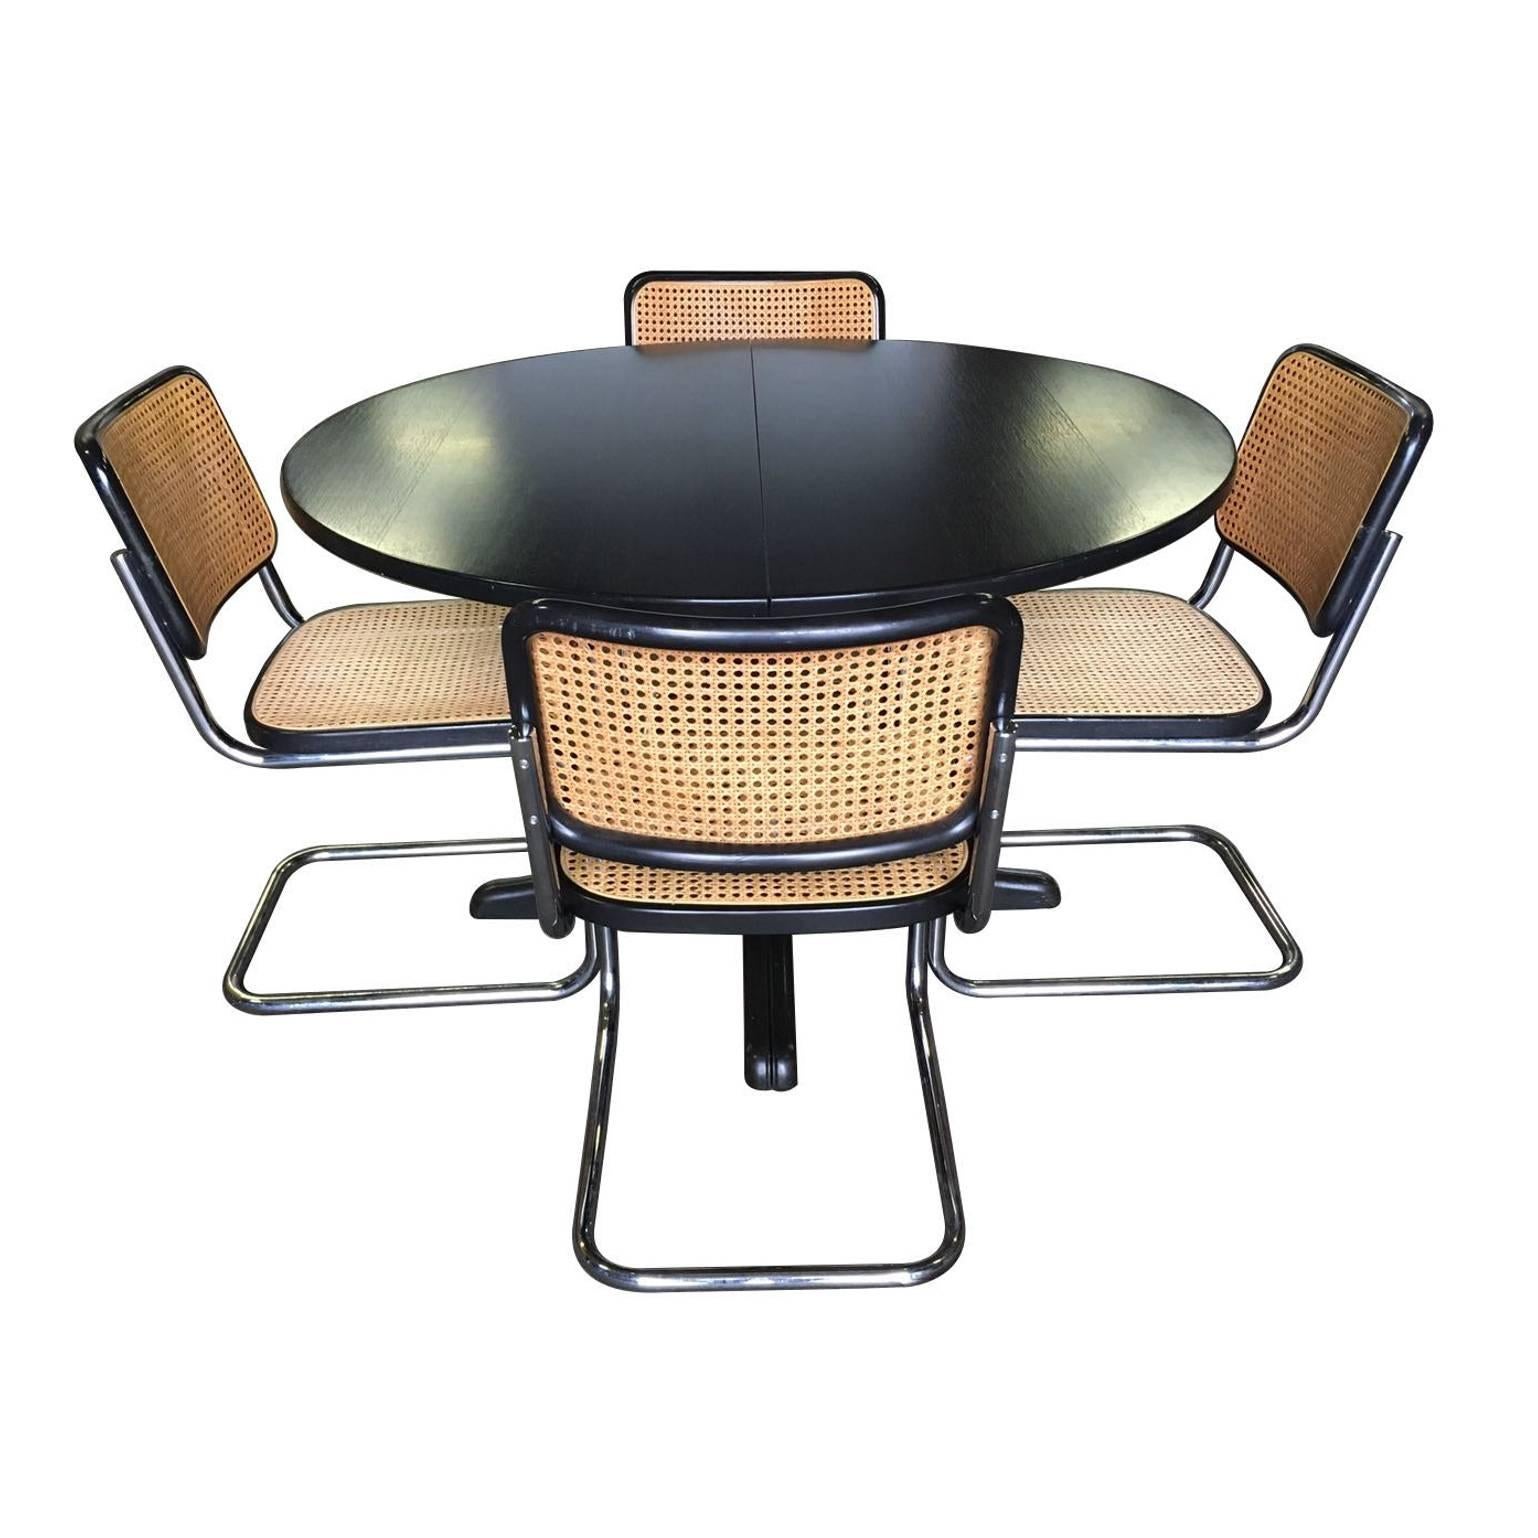 Dining set by Thonet and Marcel Breuer